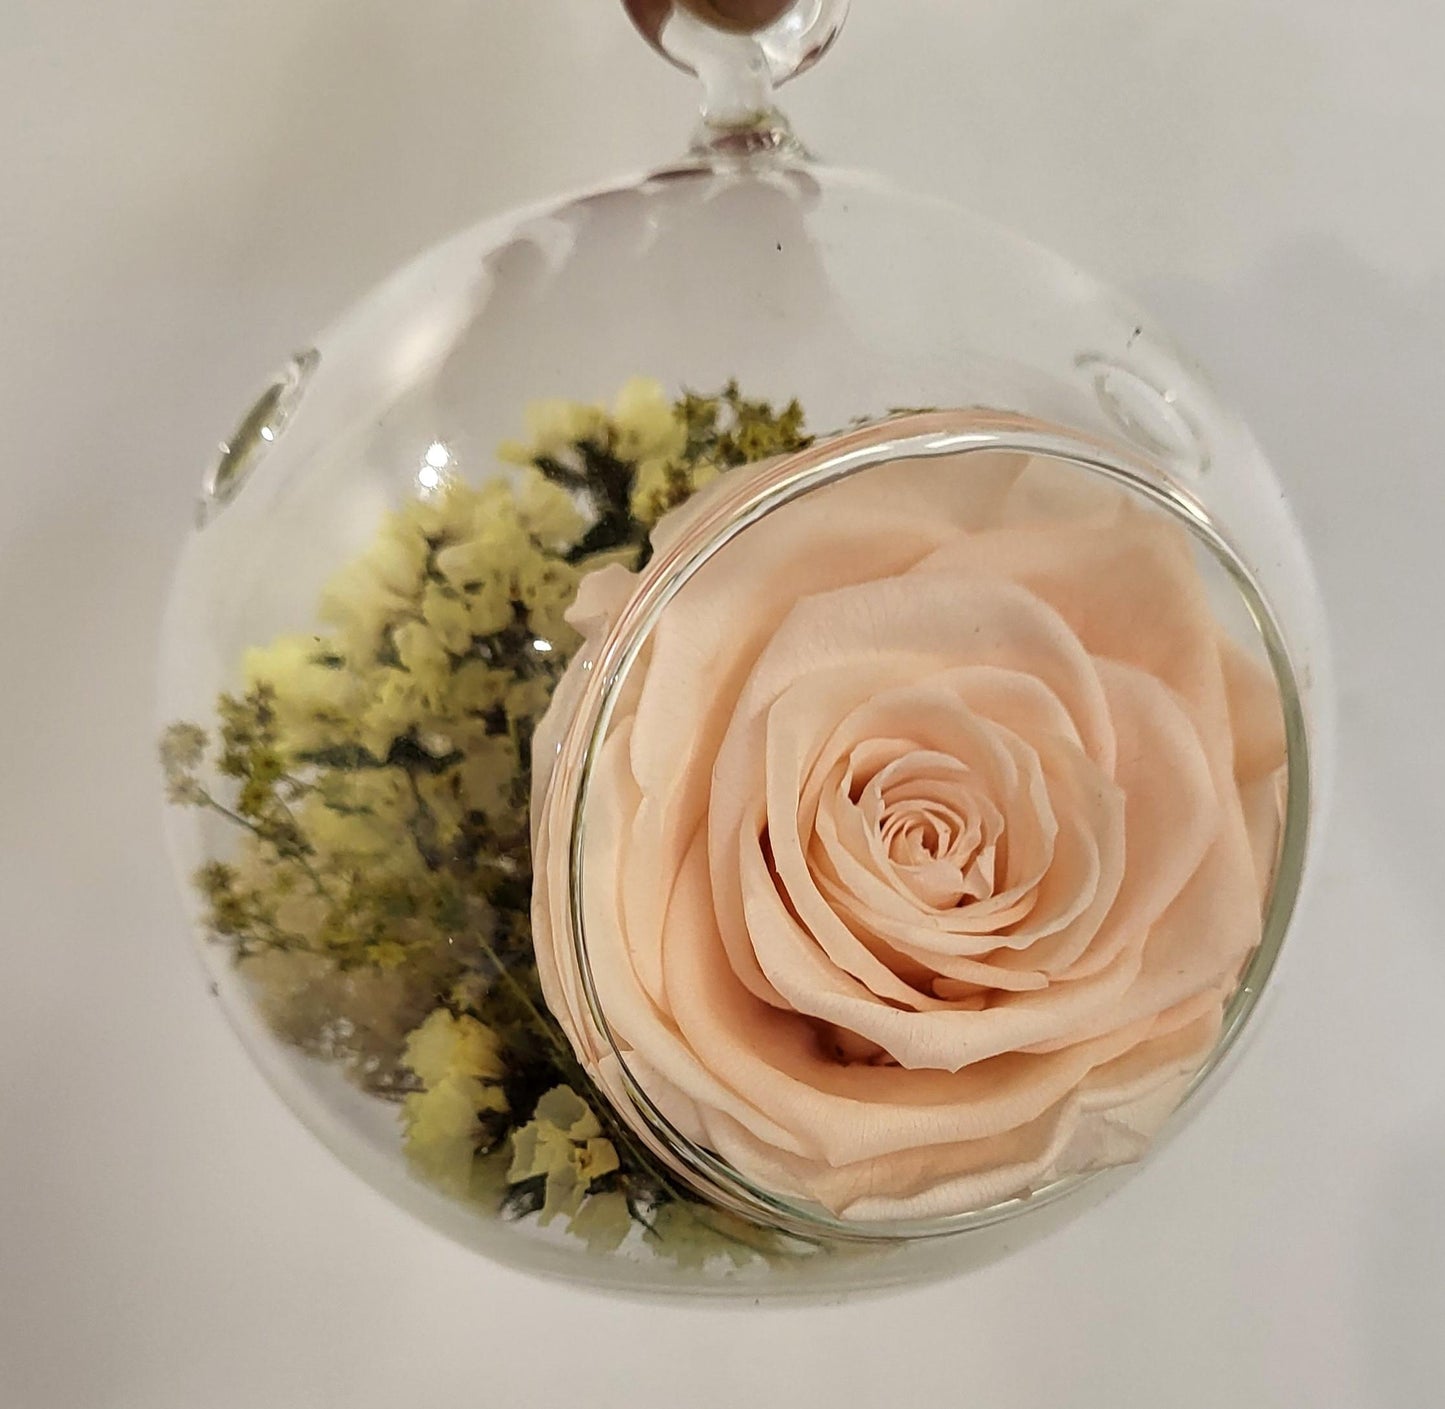 4" Preserved Rose Sphere - Pale Peach (RS4.PP1)